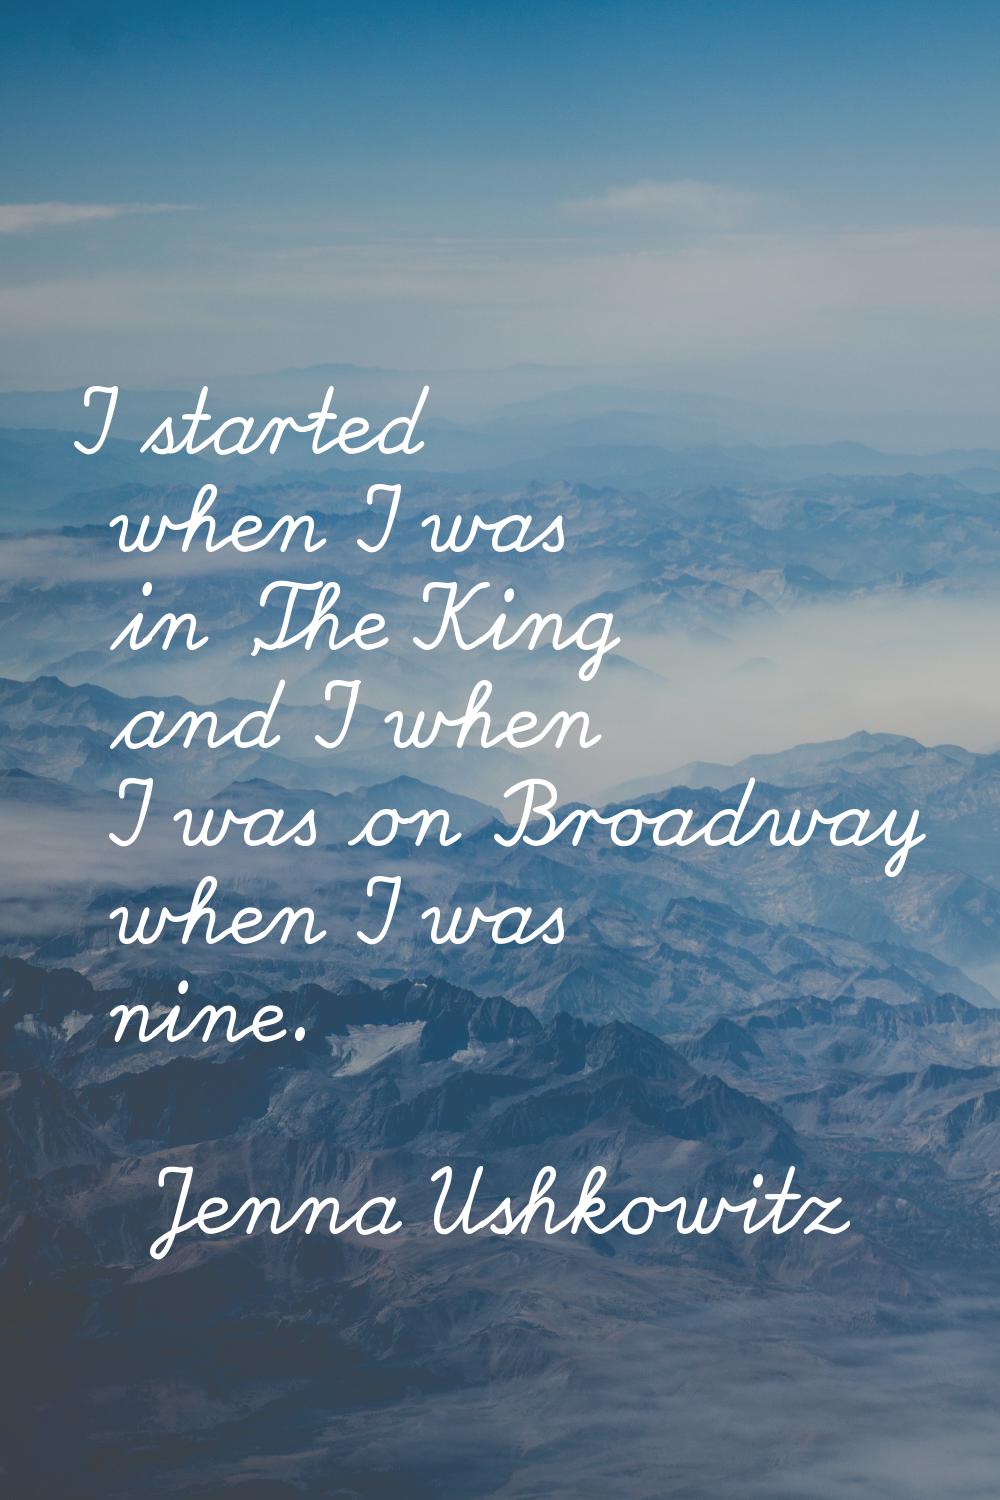 I started when I was in 'The King and I' when I was on Broadway when I was nine.